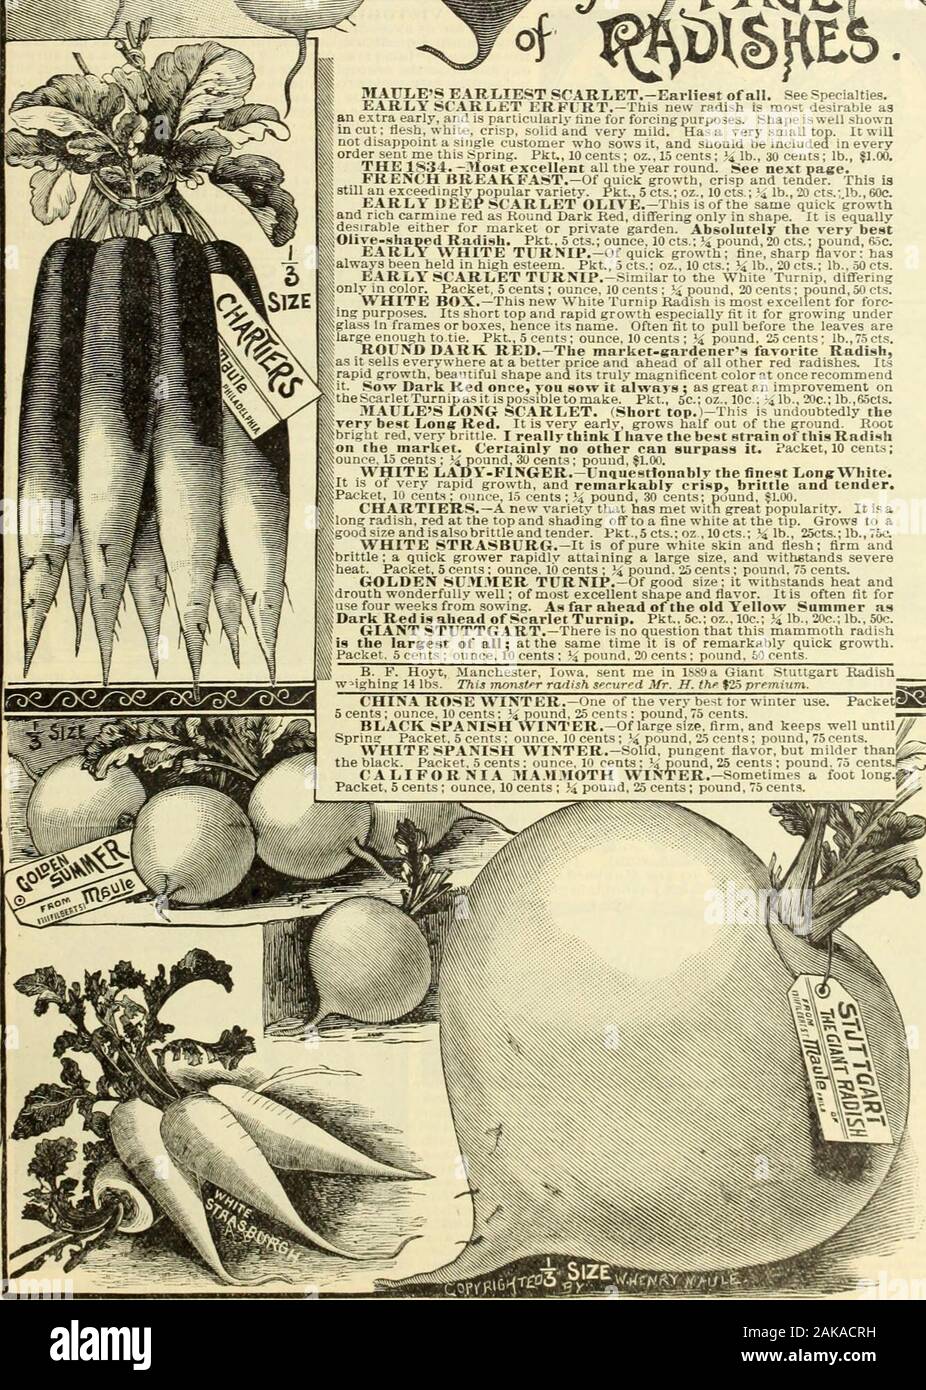 Maule's seed catalogue : 1896 . MAFLES EARLIEST SrARL.ET.-EarIiest of all. See Specialties. EARLY .SCAKJjET i:RFLKT.-This new radish is most desirable asan extra early, and is particularly tine for forcing purposes. Shape is well shownin cut; flesh, white, crisp, solid and very mild. Has a very small top. It willnot disappoint a single customer who sows it, and should be included in everyorder sent me this .Spring. Pkt., 10 cents; oz., 15 cents; J4 lb., 30 cents; lb., |].00. THE 1S34.—Most excellent all the year round. See next paee. FRENCH BREAKFA?&gt;T.—Of quick growth, crisp and tender. Thi Stock Photo